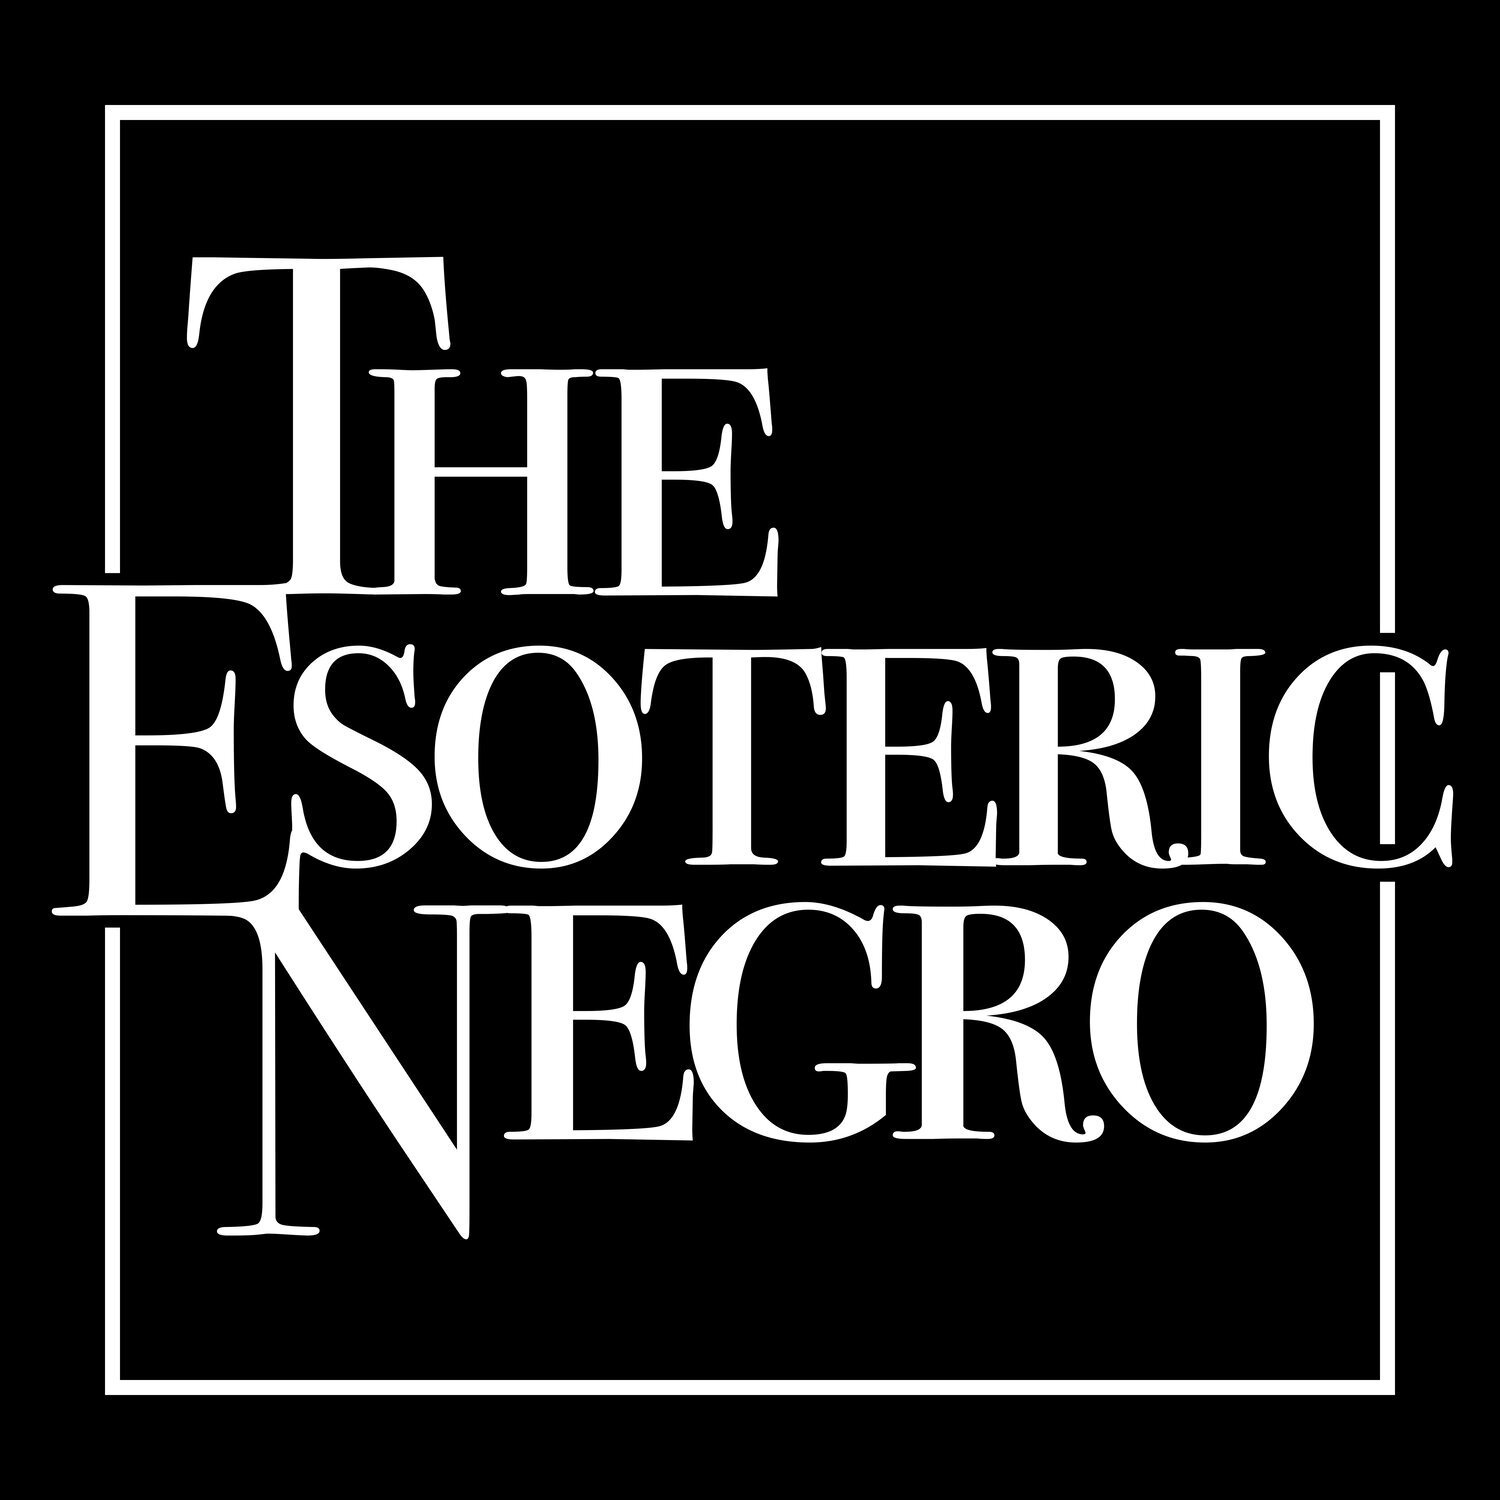 The Esoteric Negro